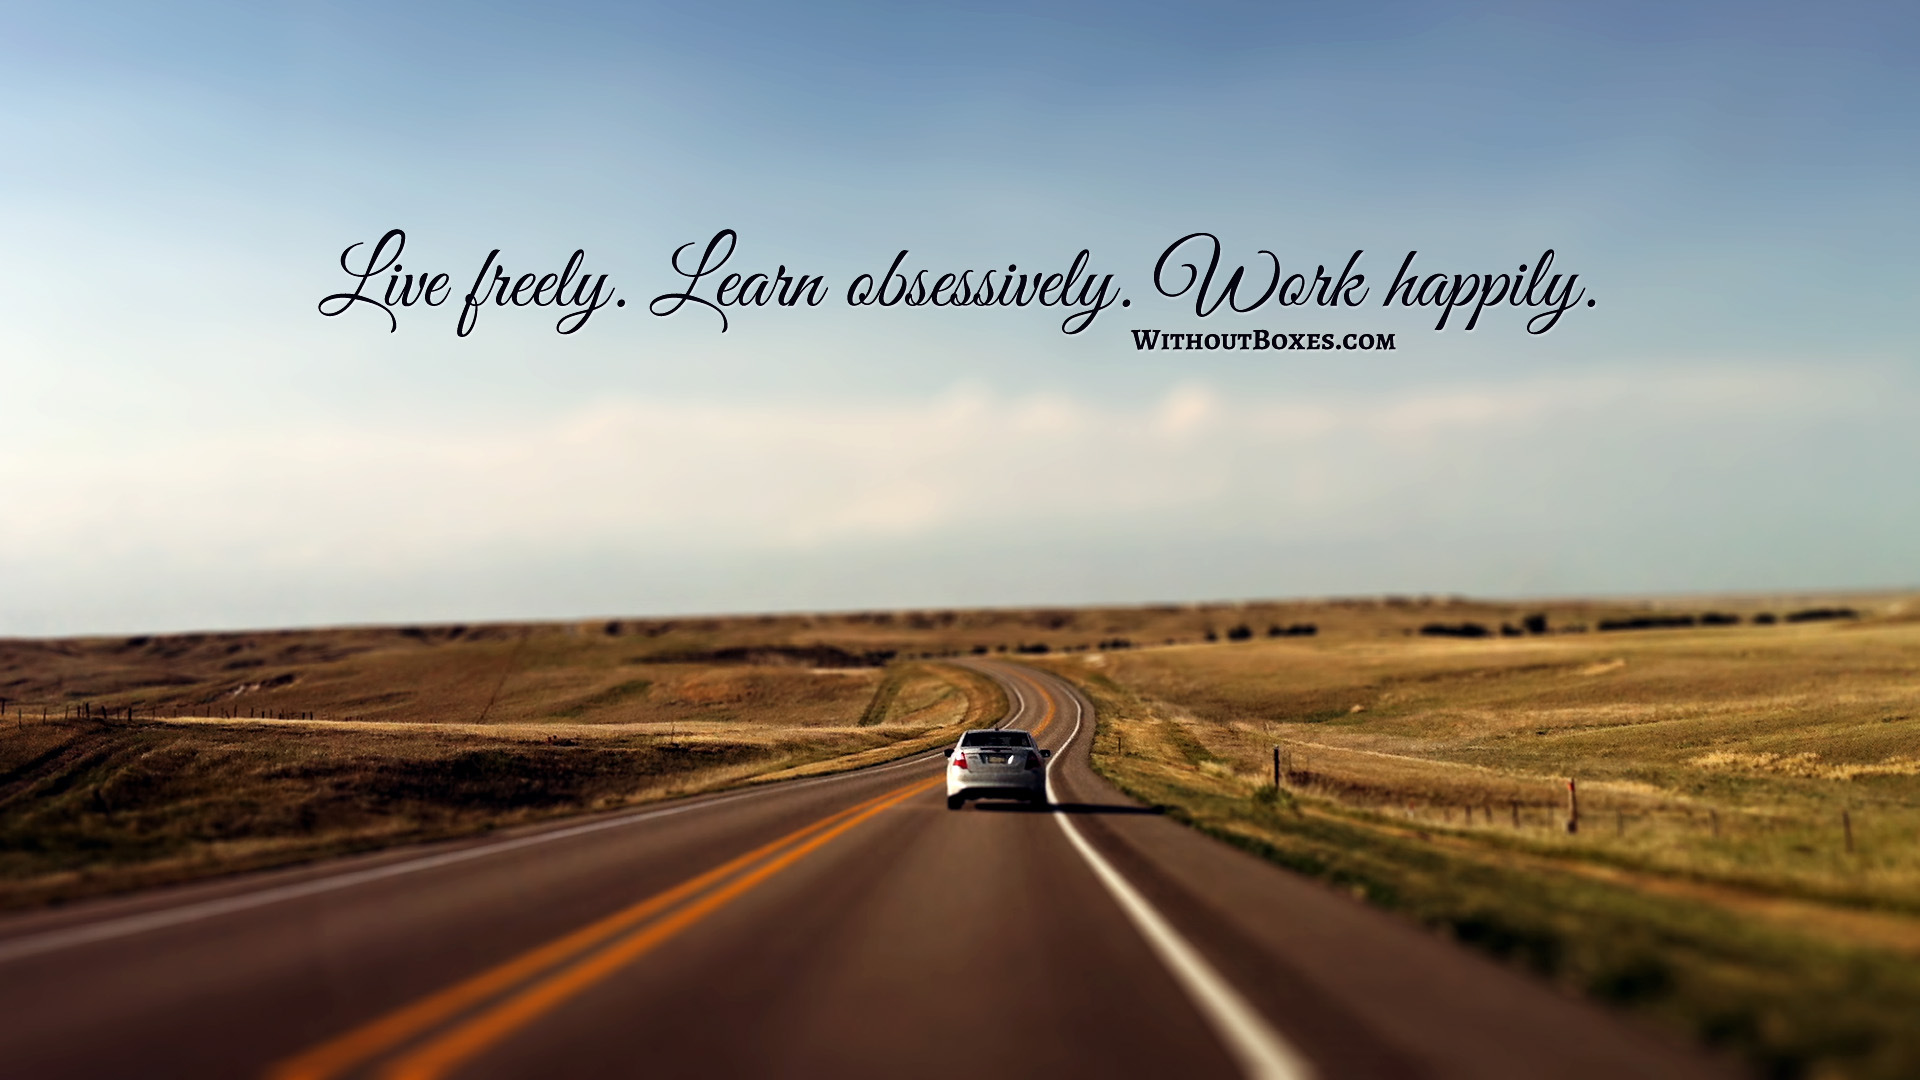 Wallpaper Of Car Driving Into The Distance With Quote Live Ly